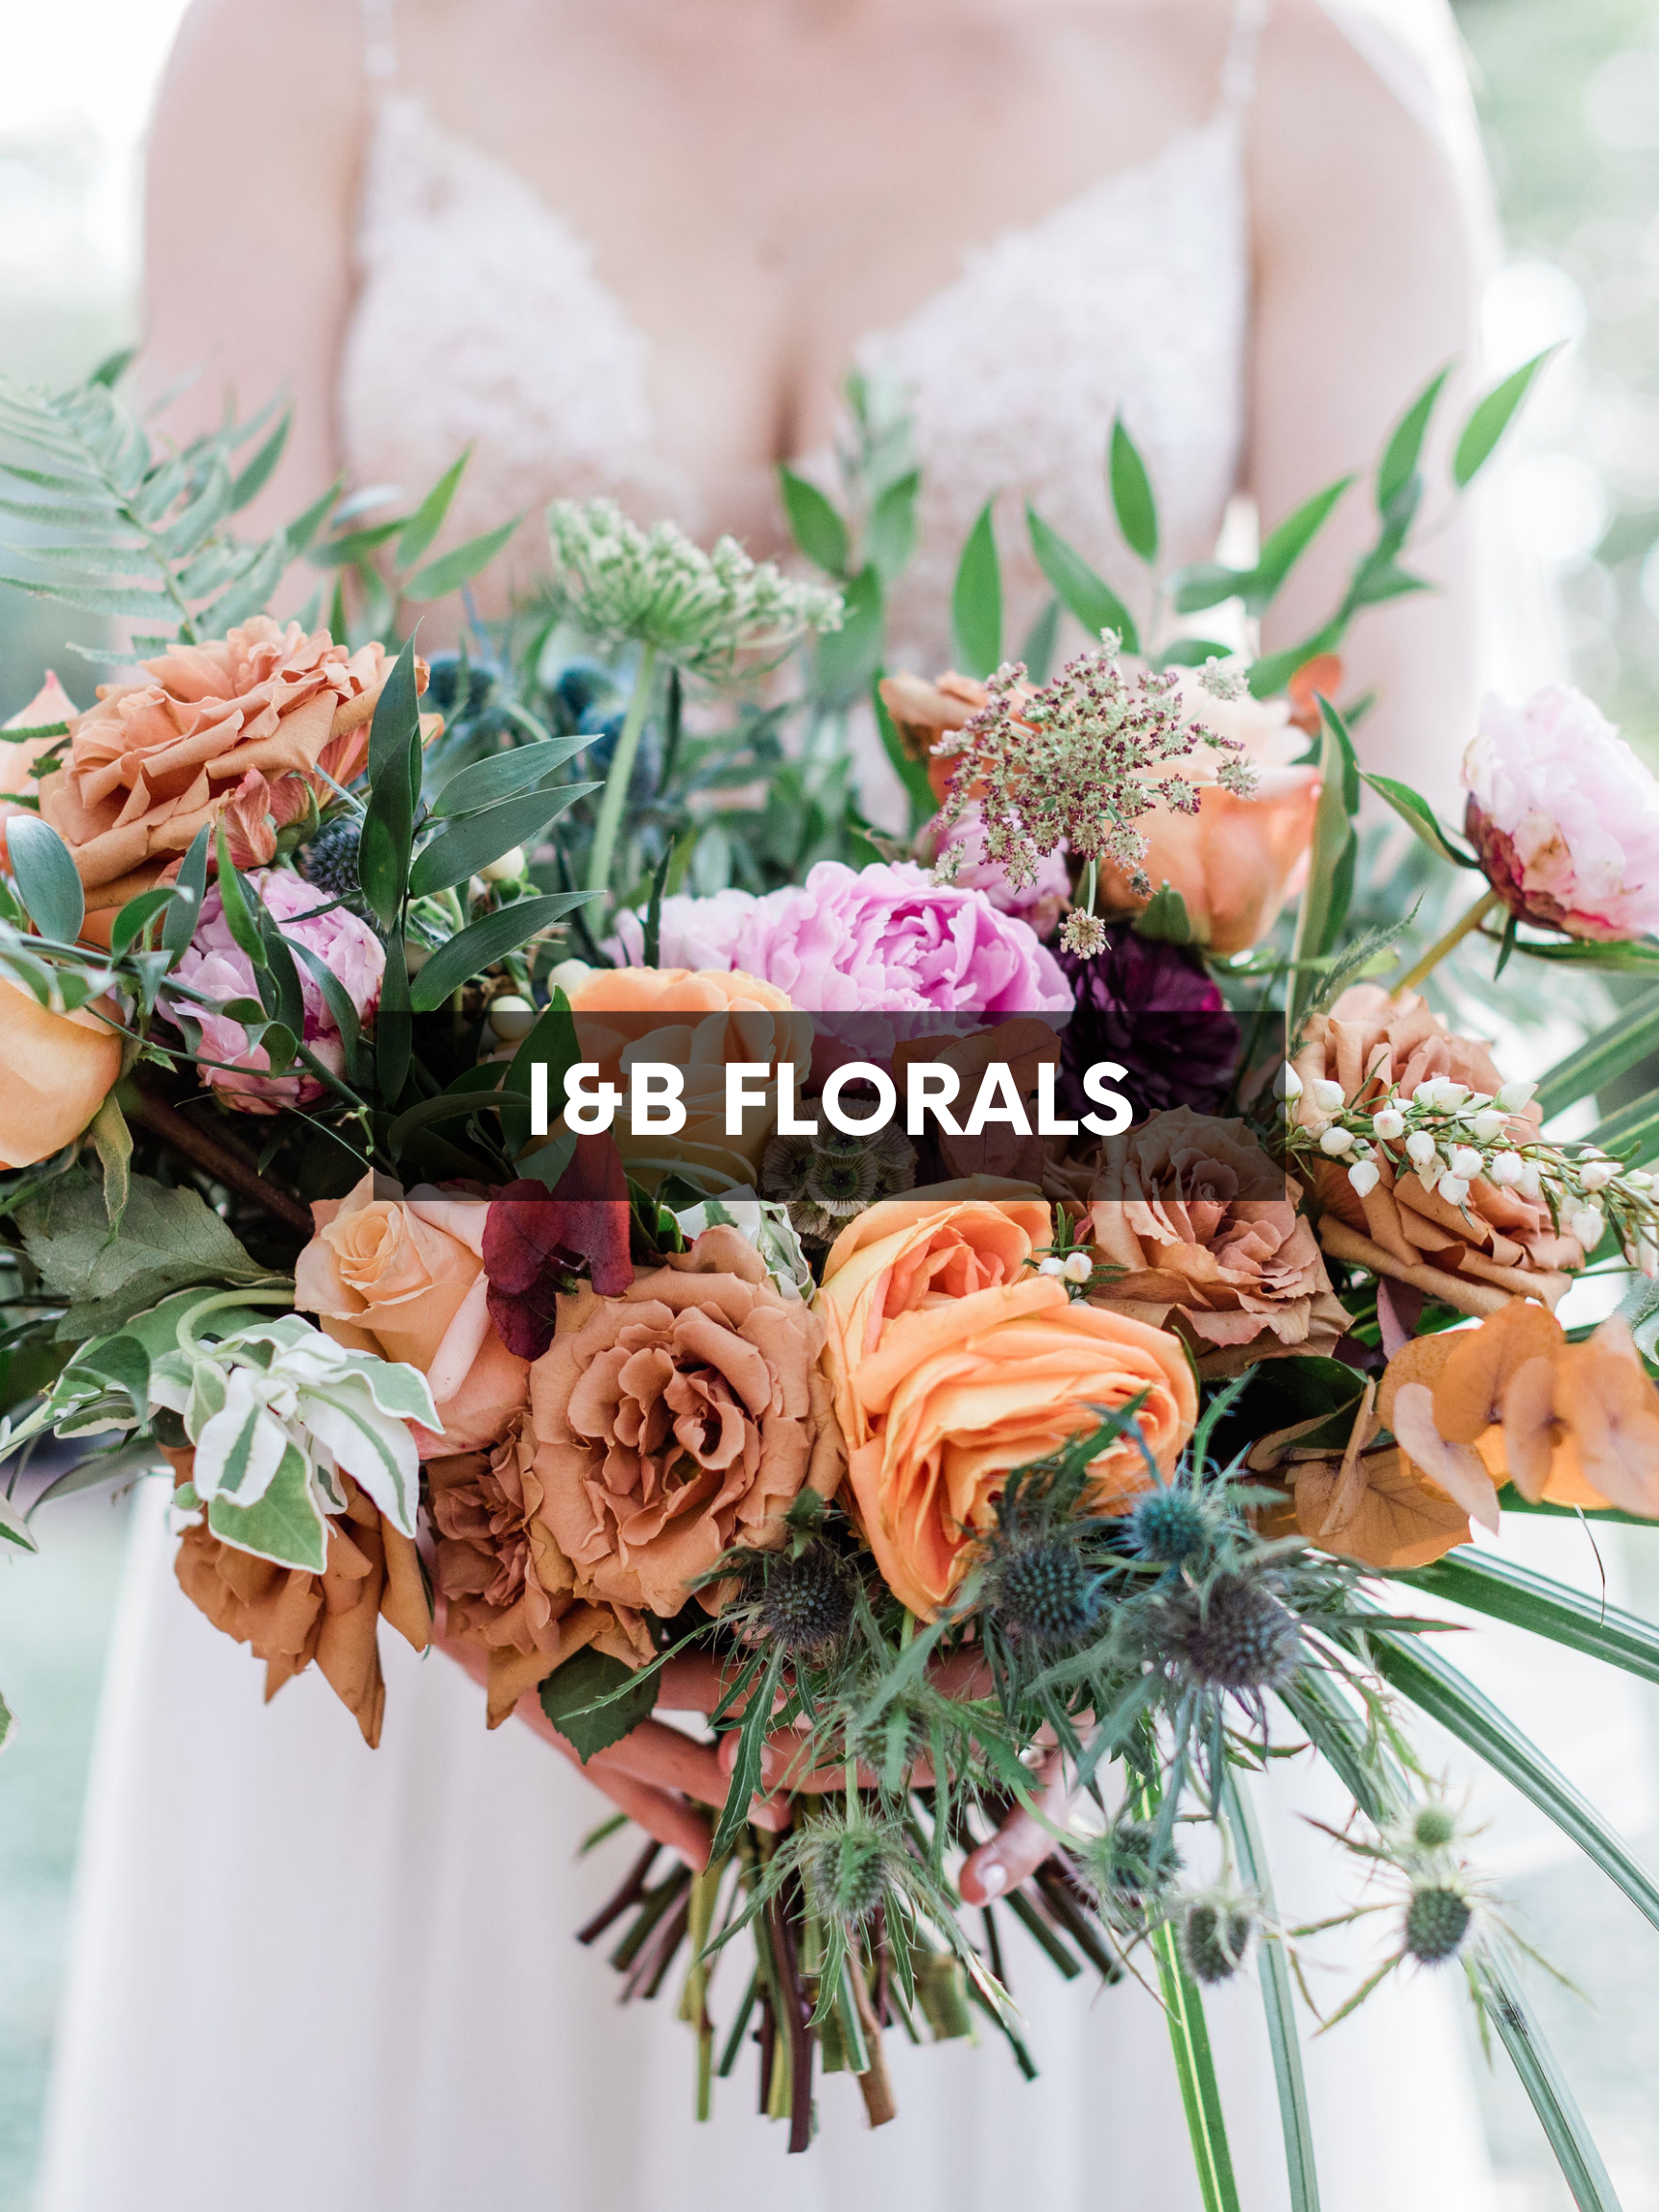 ivory-and-beau-florals-wedding-flowers-wedding-florist-savannah-florist-wedding-florals-floral-design-3.png